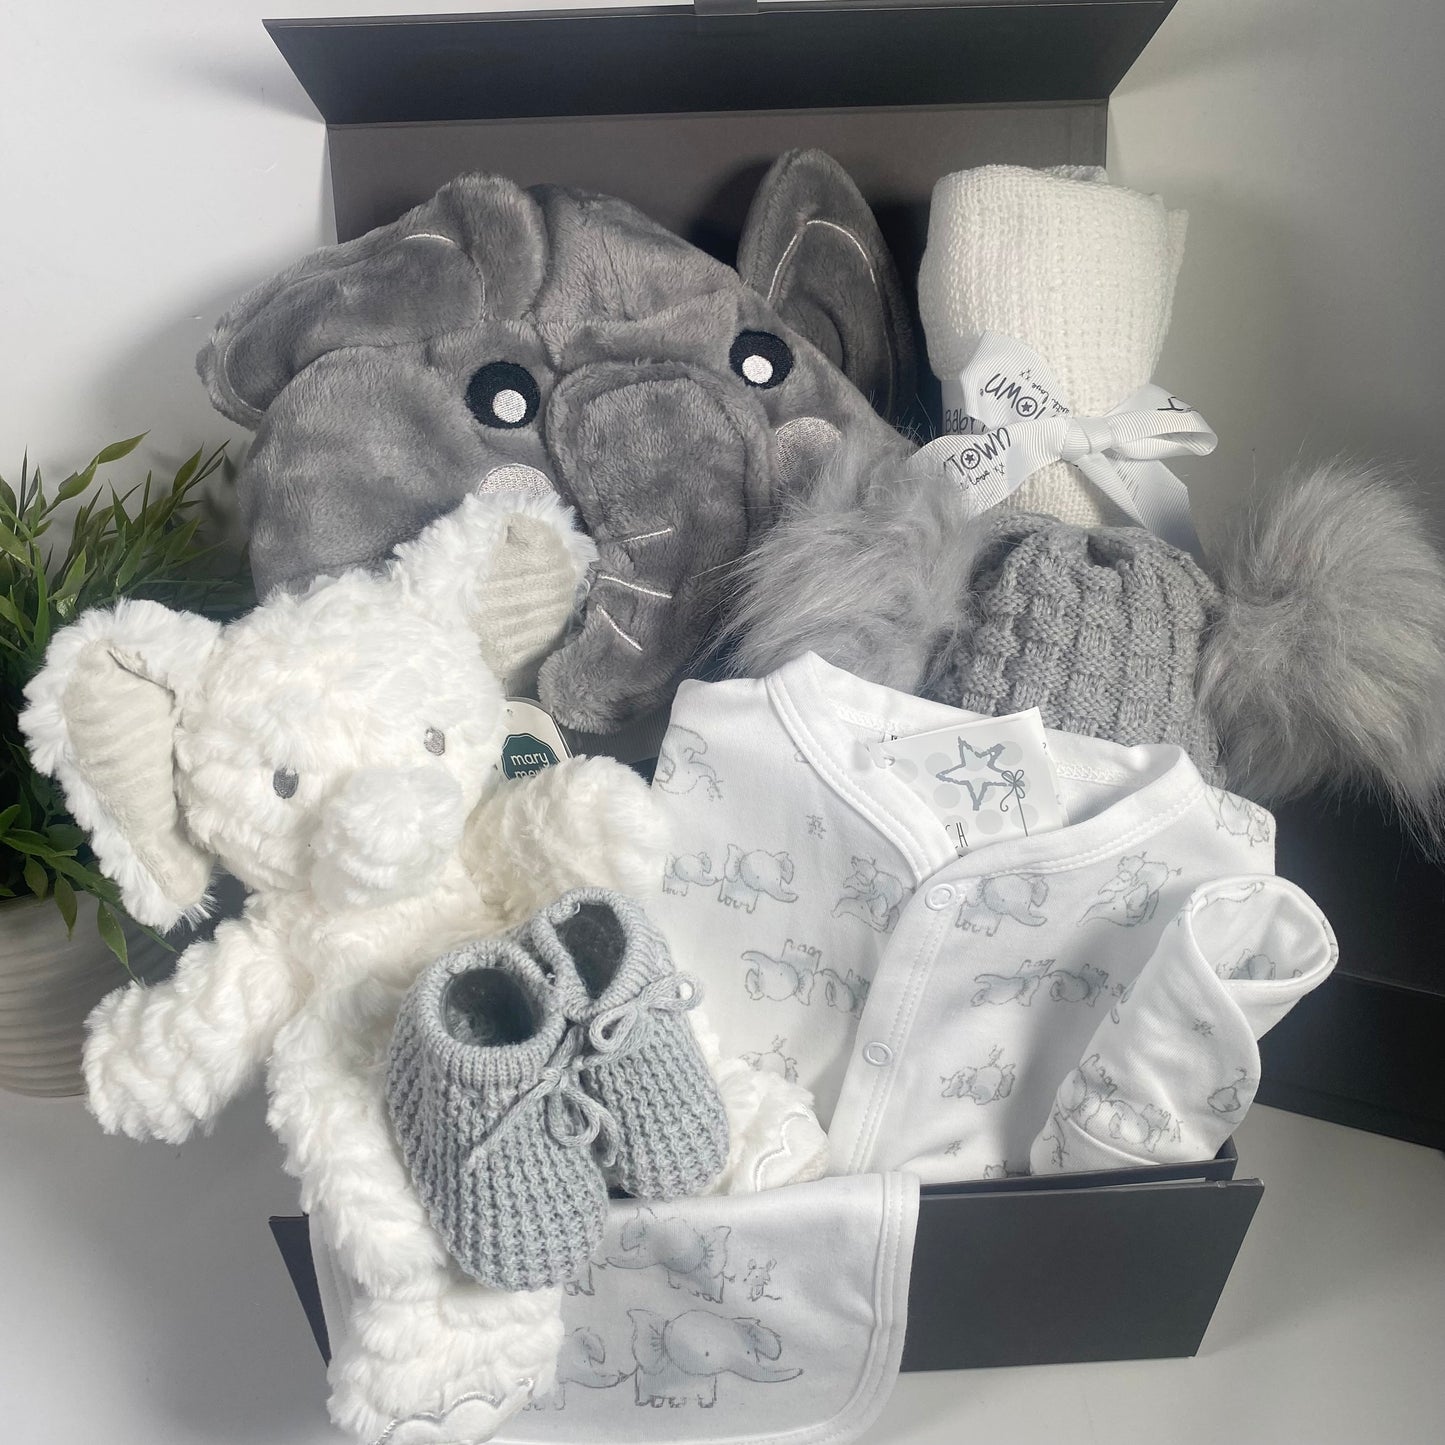 A Grey and white unisex elephant themmed baby hamper in a grey magnetic baby keepsake box with a baby hooded elephant dressing gown, a white Elephant lovey baby soft toy, a sleepsuit with matching bib and hat in white with a grey elephant print. A soft white cotton cellular baby blanakey, a pair of grey baby booties and a baby double pompom hat in grey.